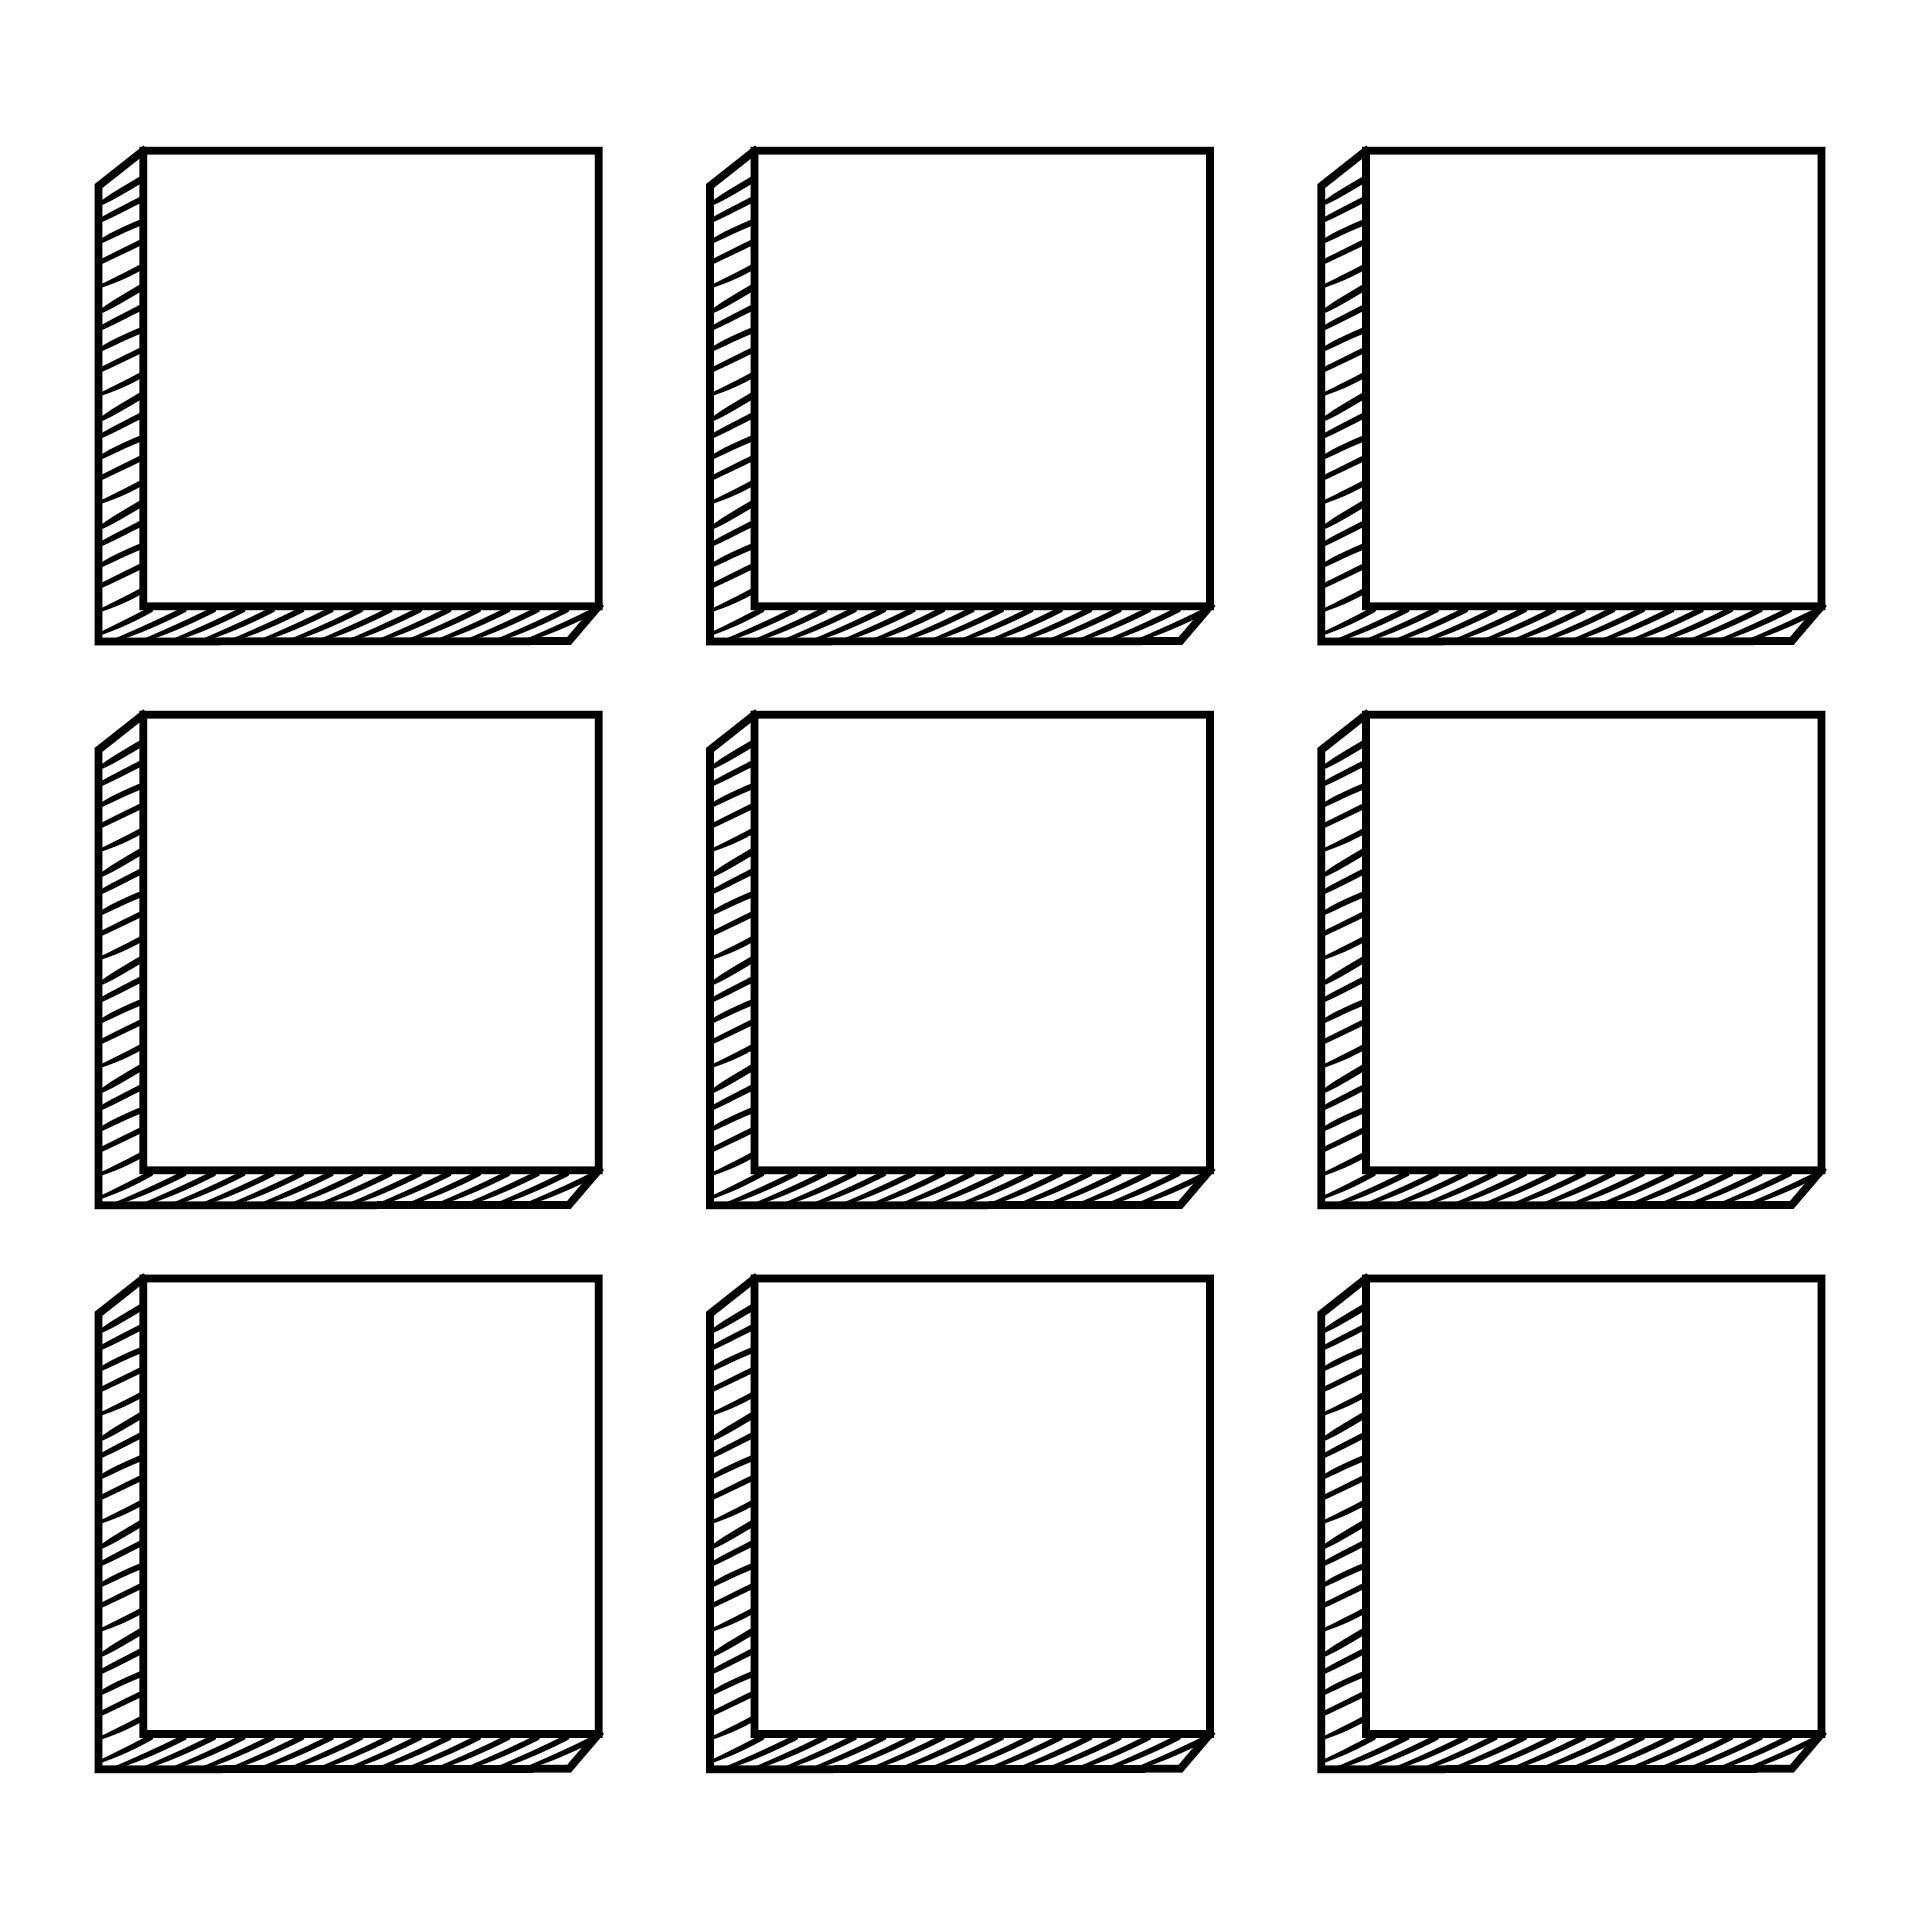 6-best-images-of-square-templates-printable-free-3-inch-square